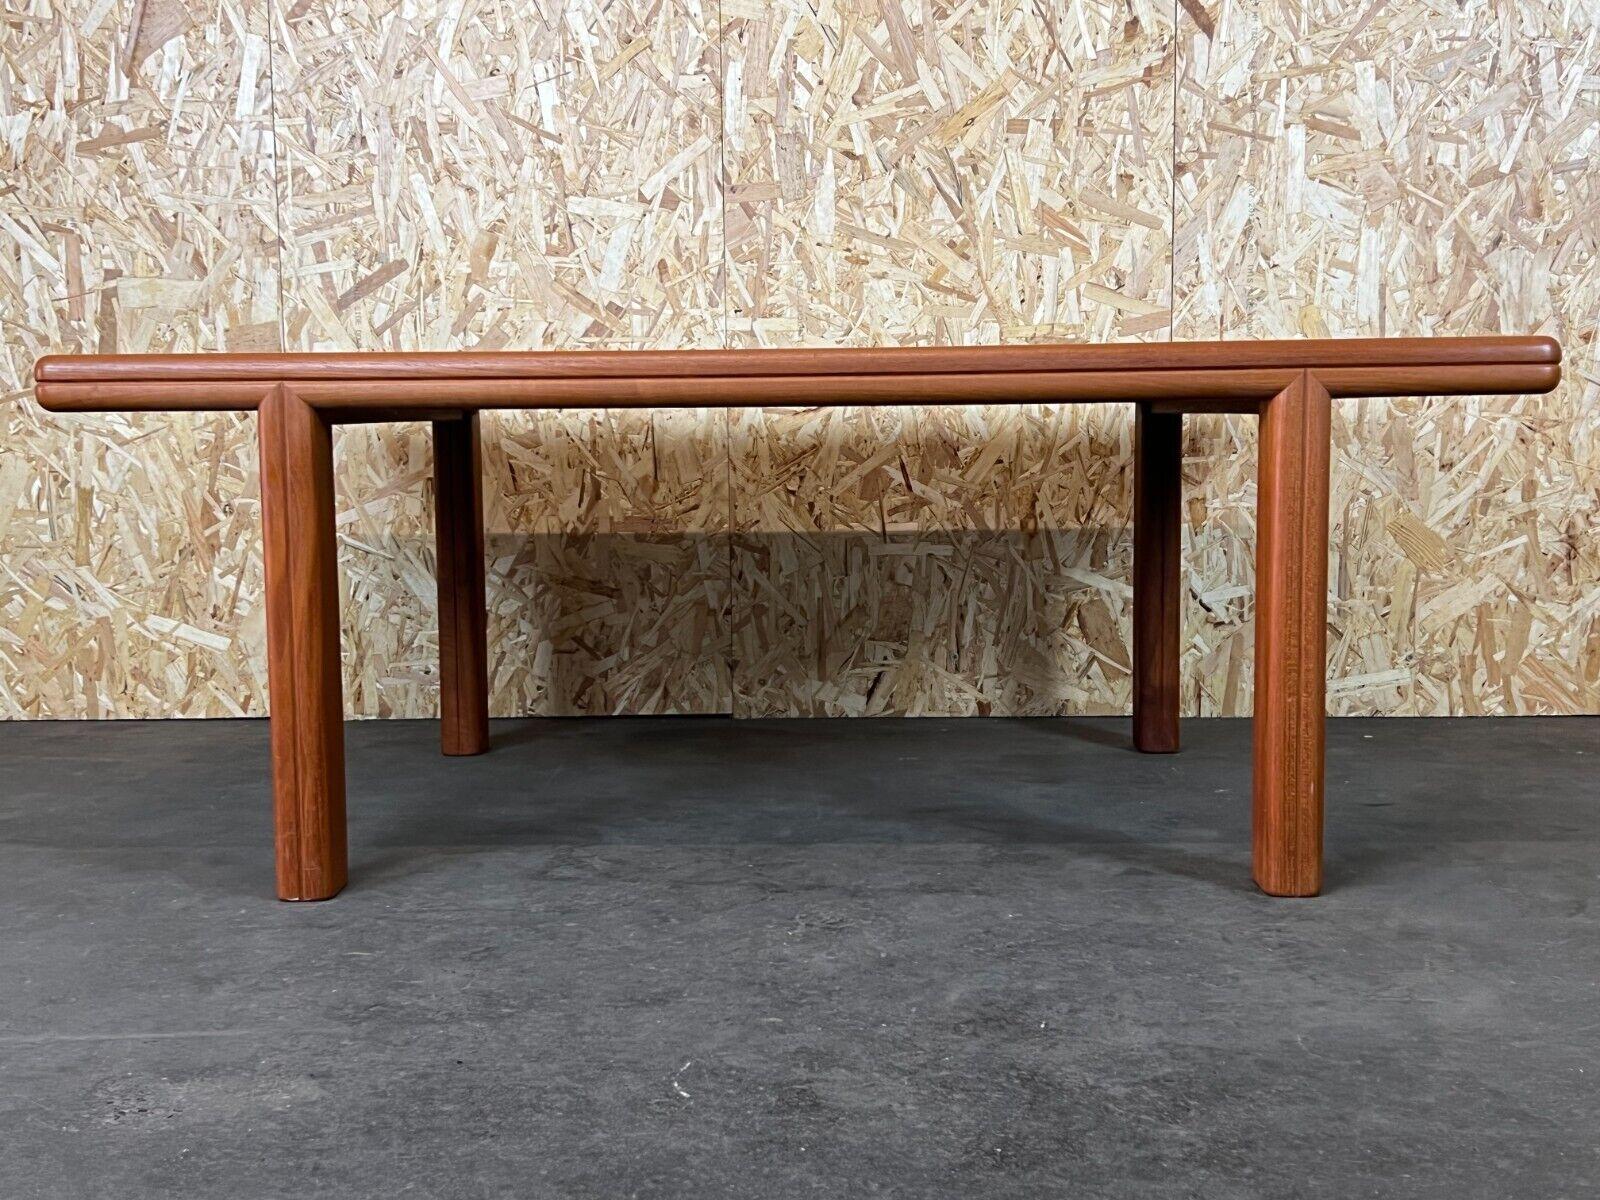 70s table coffee table Danish design Denmark mid century

Object: coffee table

Manufacturer:

Condition: good

Age: around 1960-1970

Dimensions:

136cm x 81.5cm x 50cm

Other notes:

The pictures serve as part of the